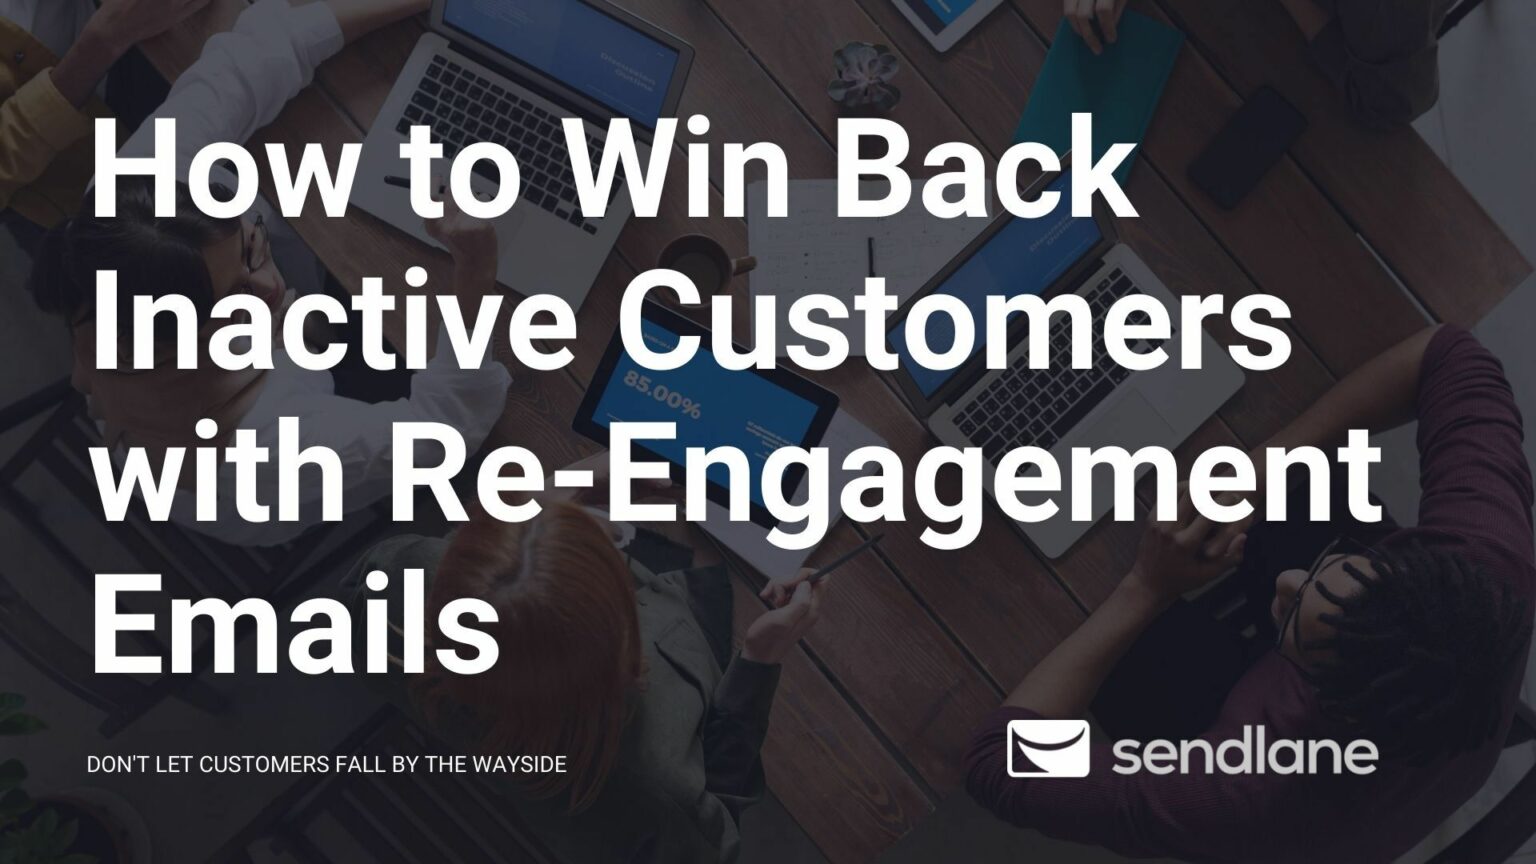 How to Win Back Inactive Customers with Re-Engagement Emails